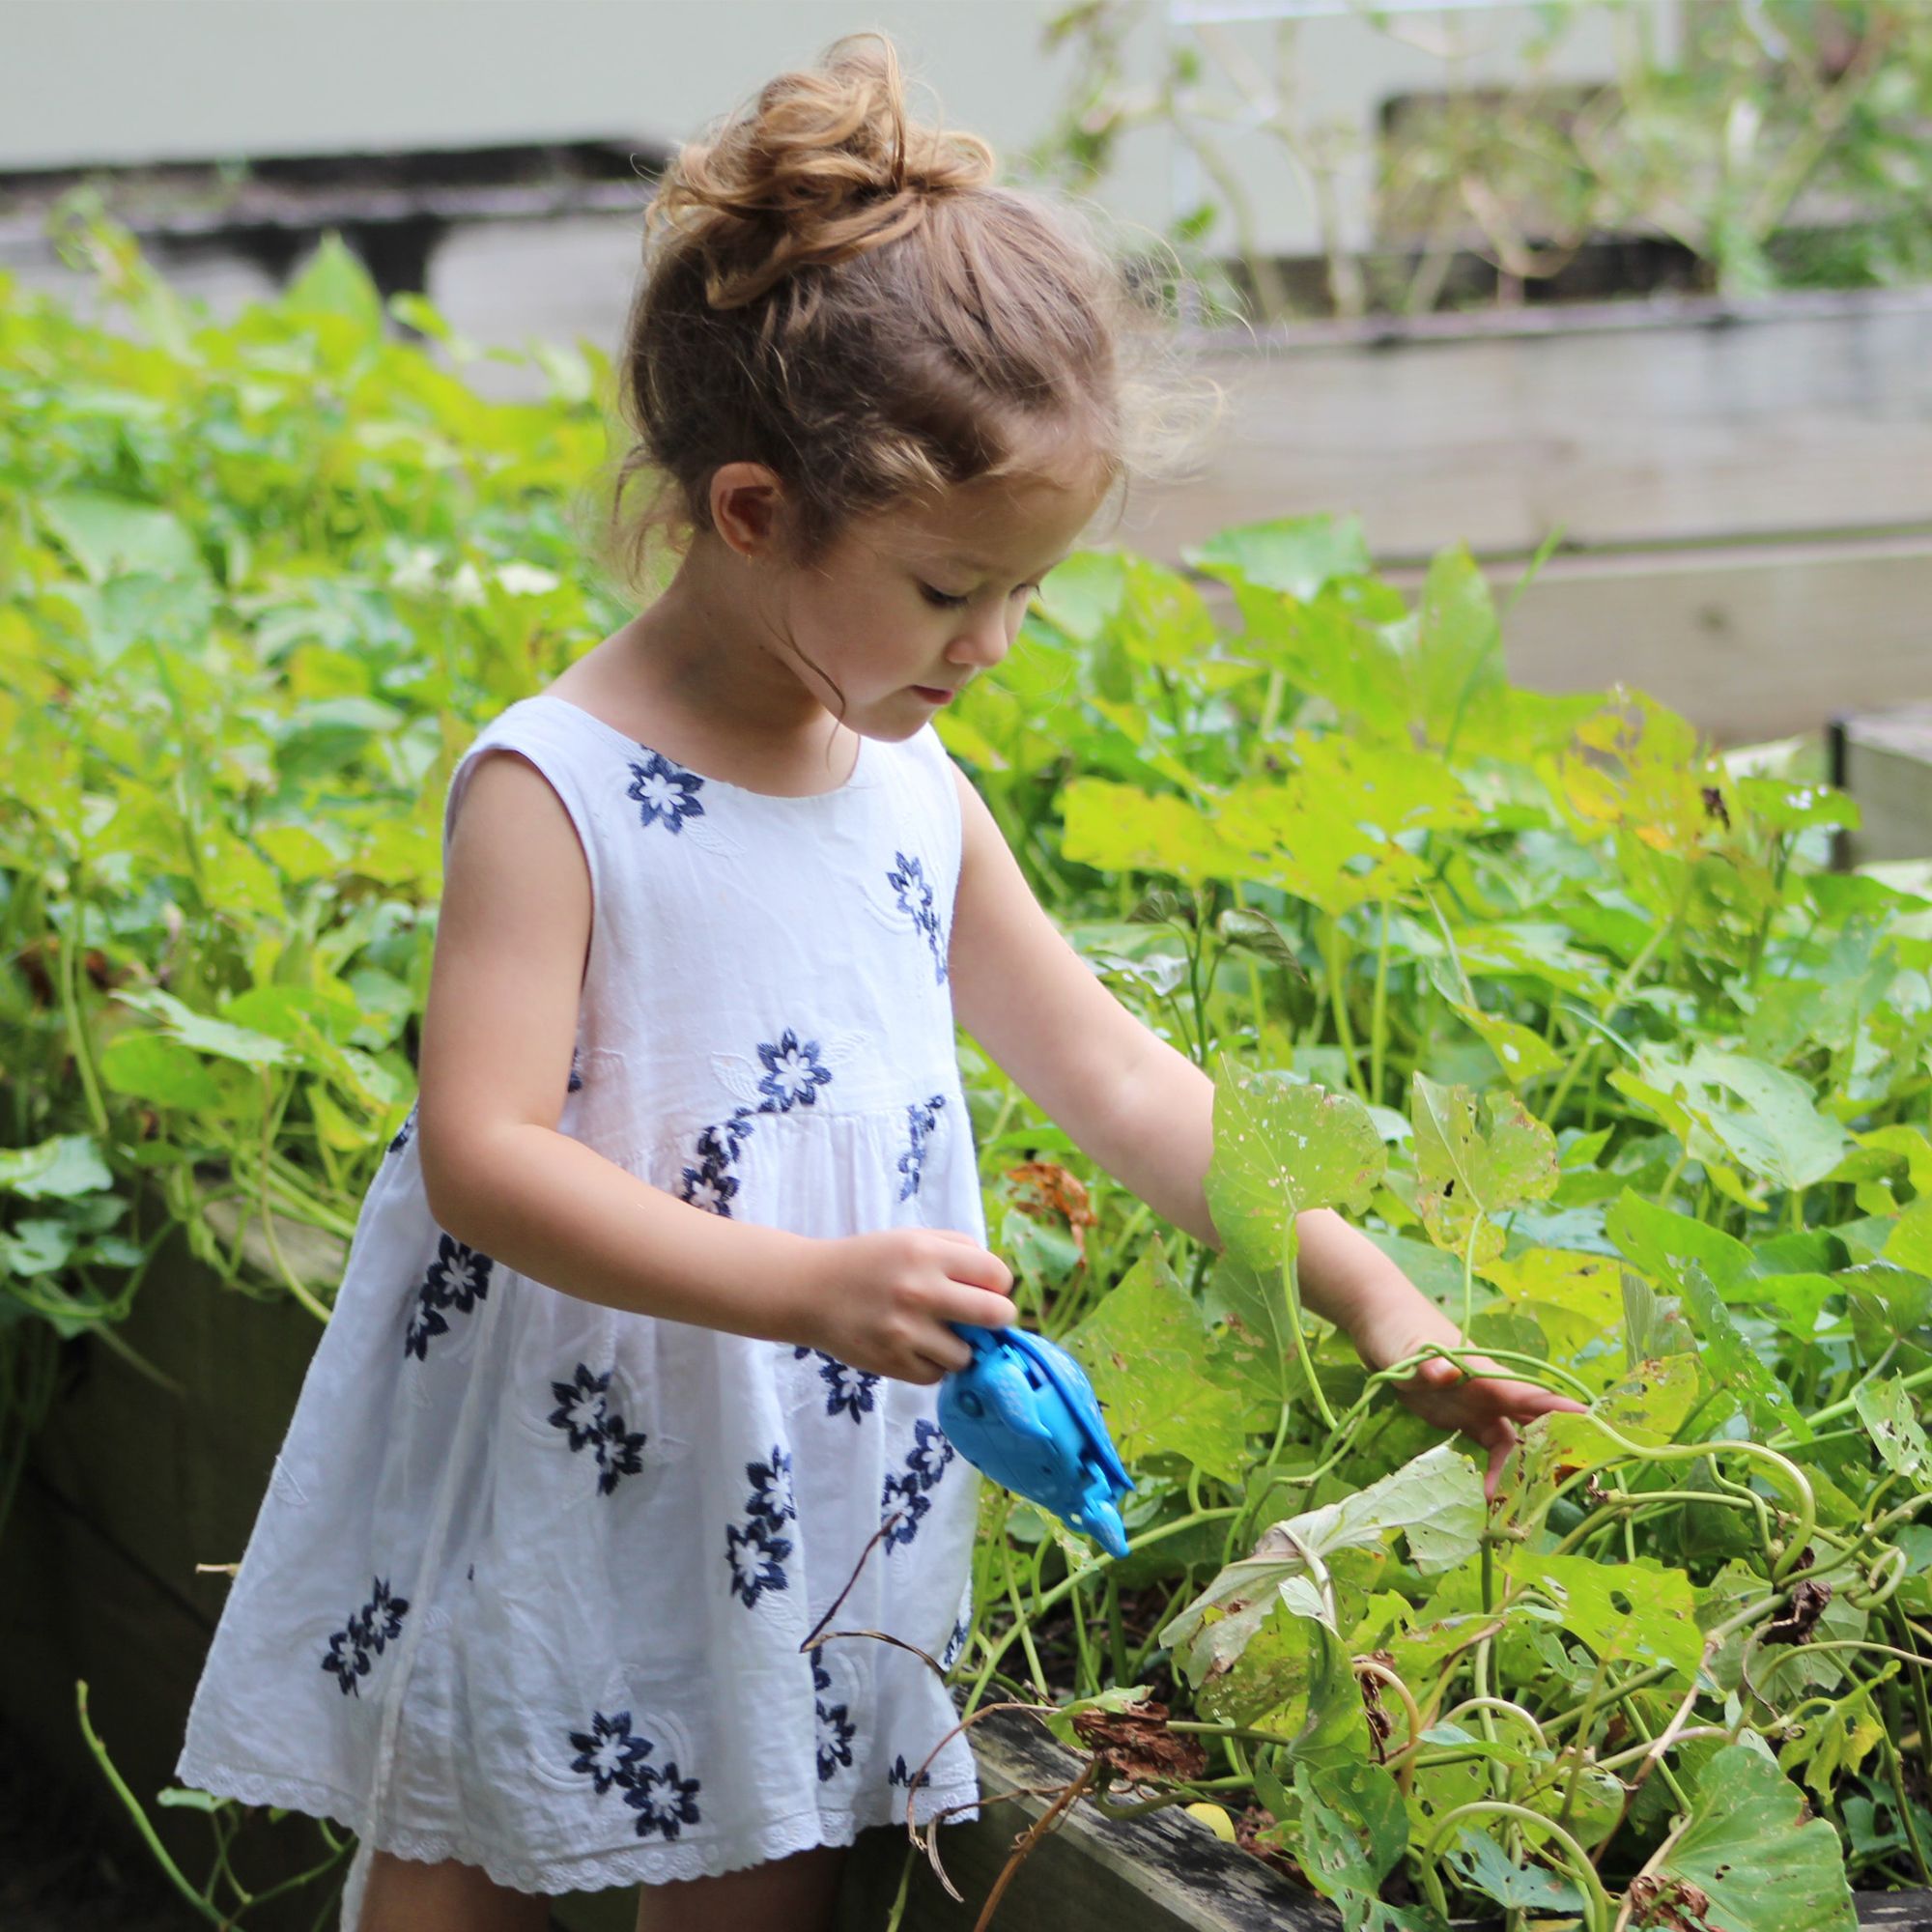 Do Your Little Ones Know How Plants Grow?